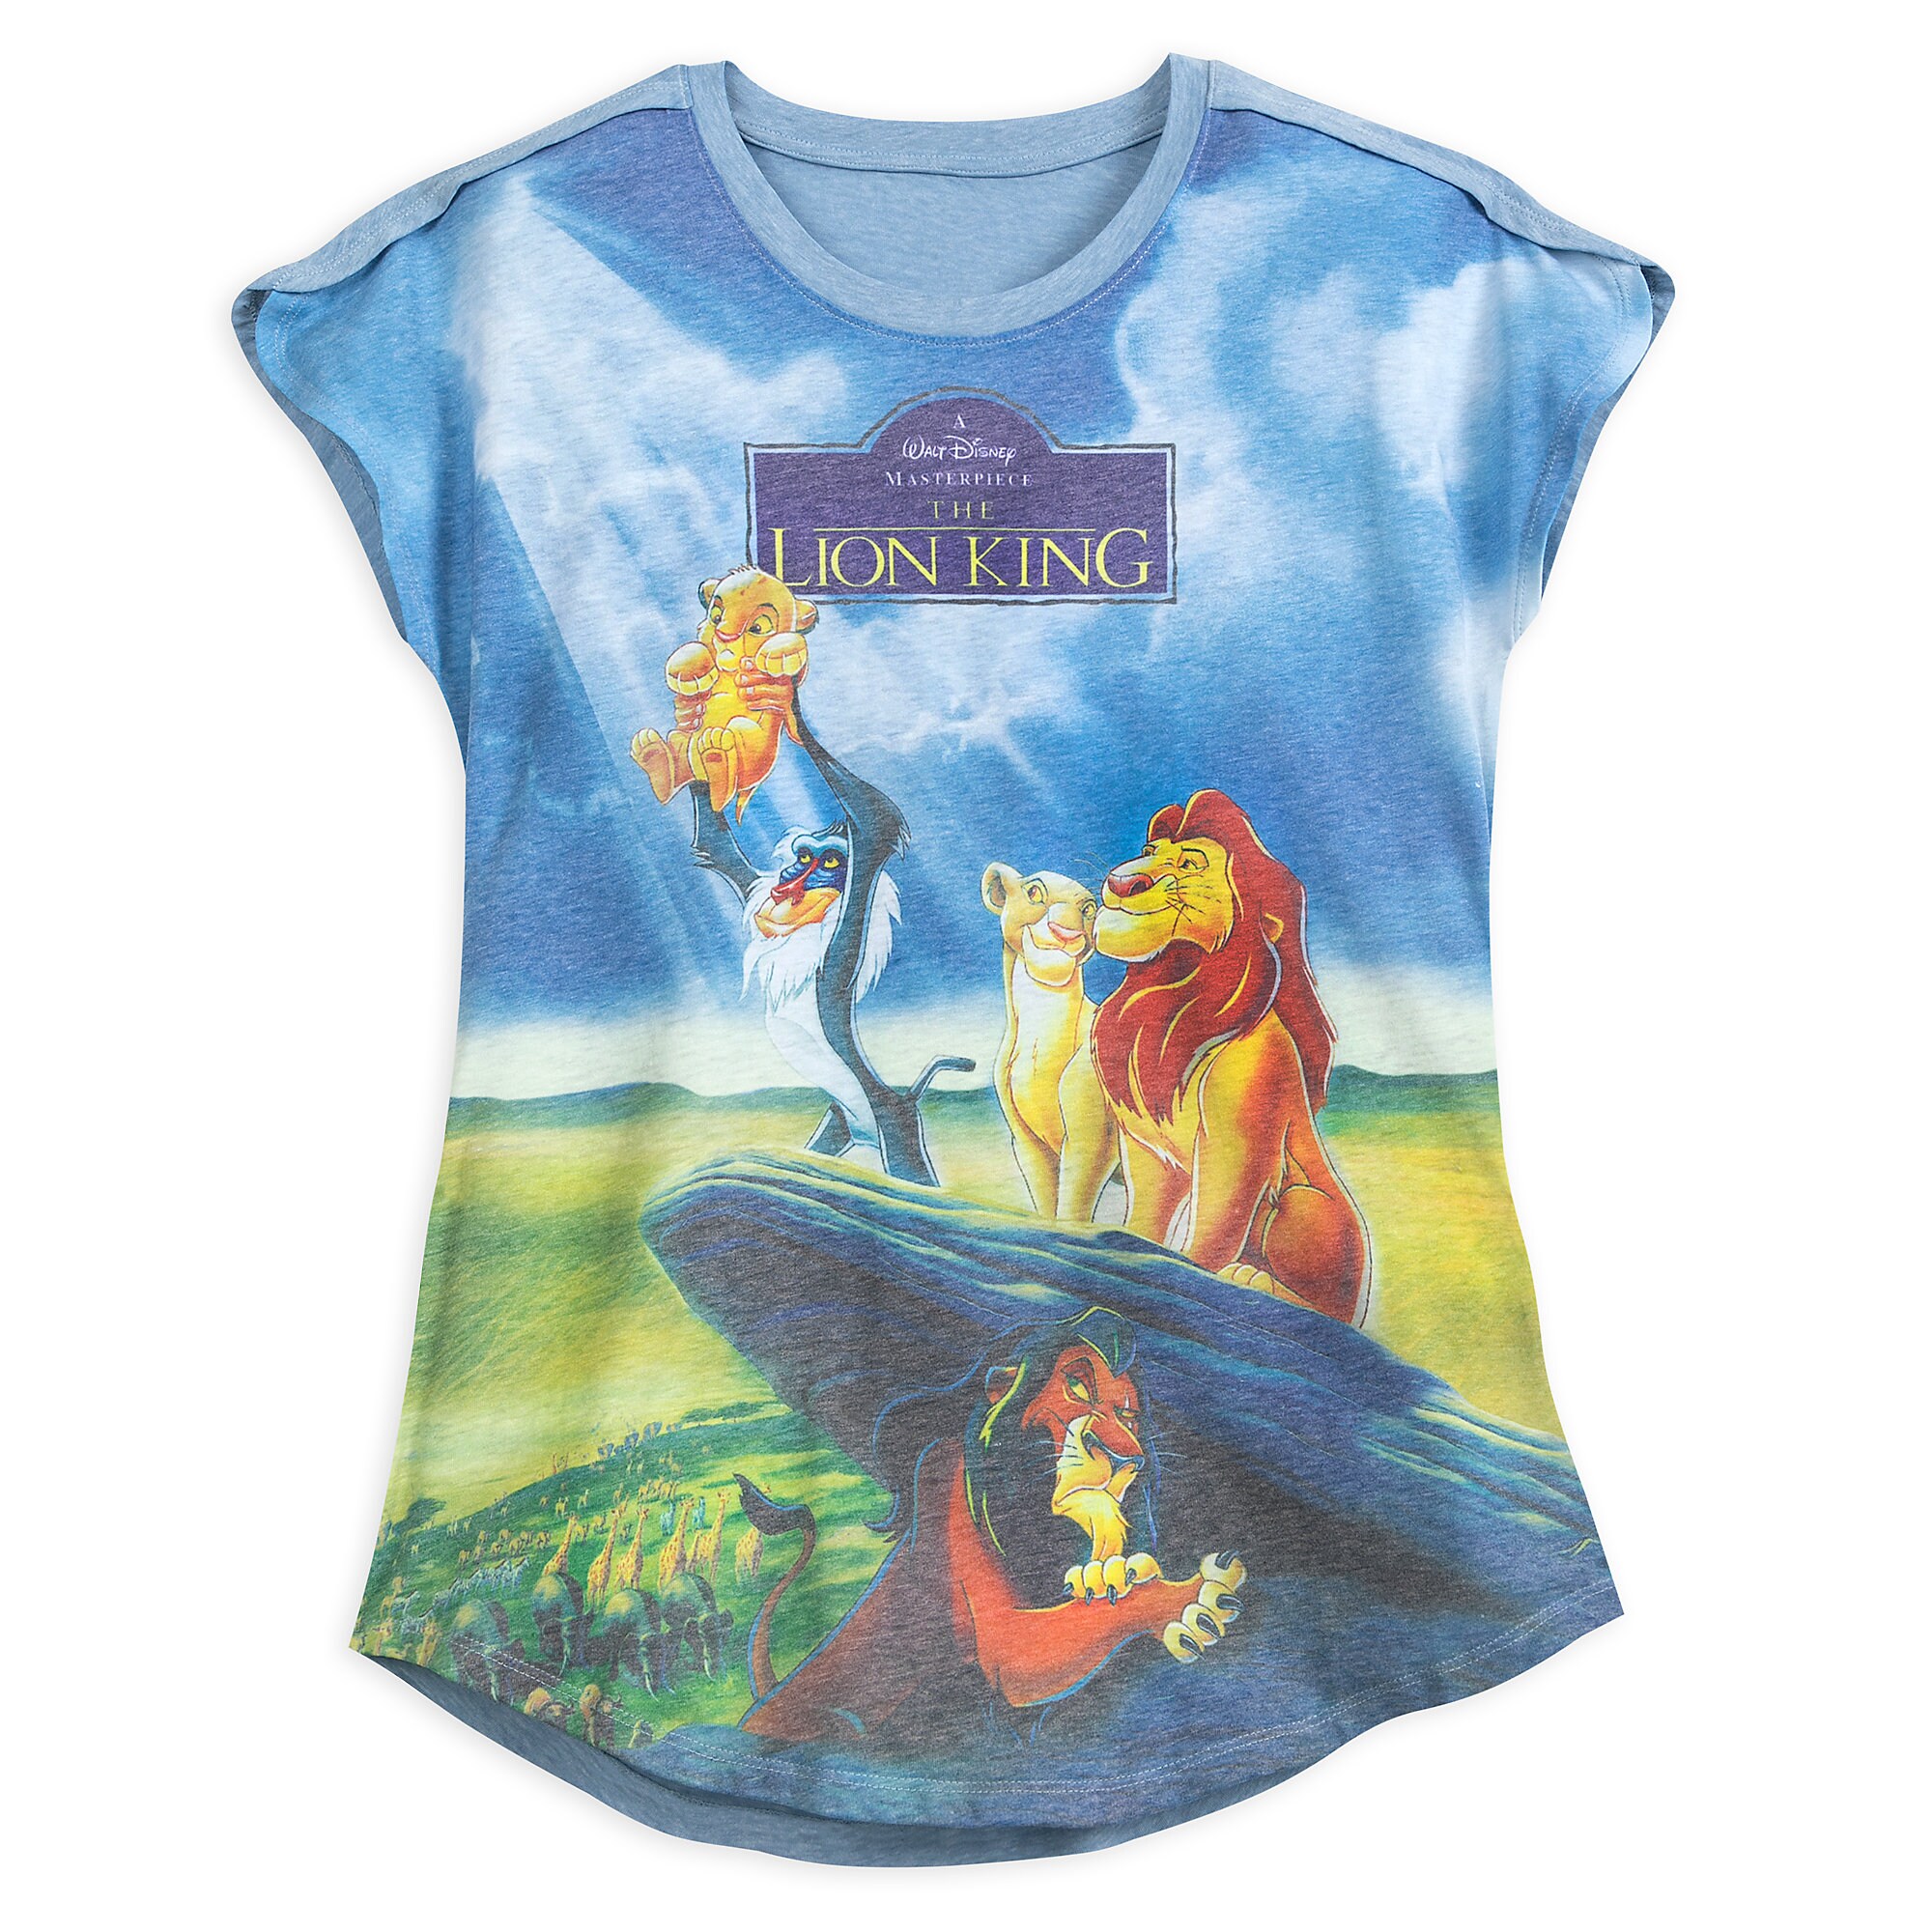 The Lion King VHS Cover T-Shirt for Women